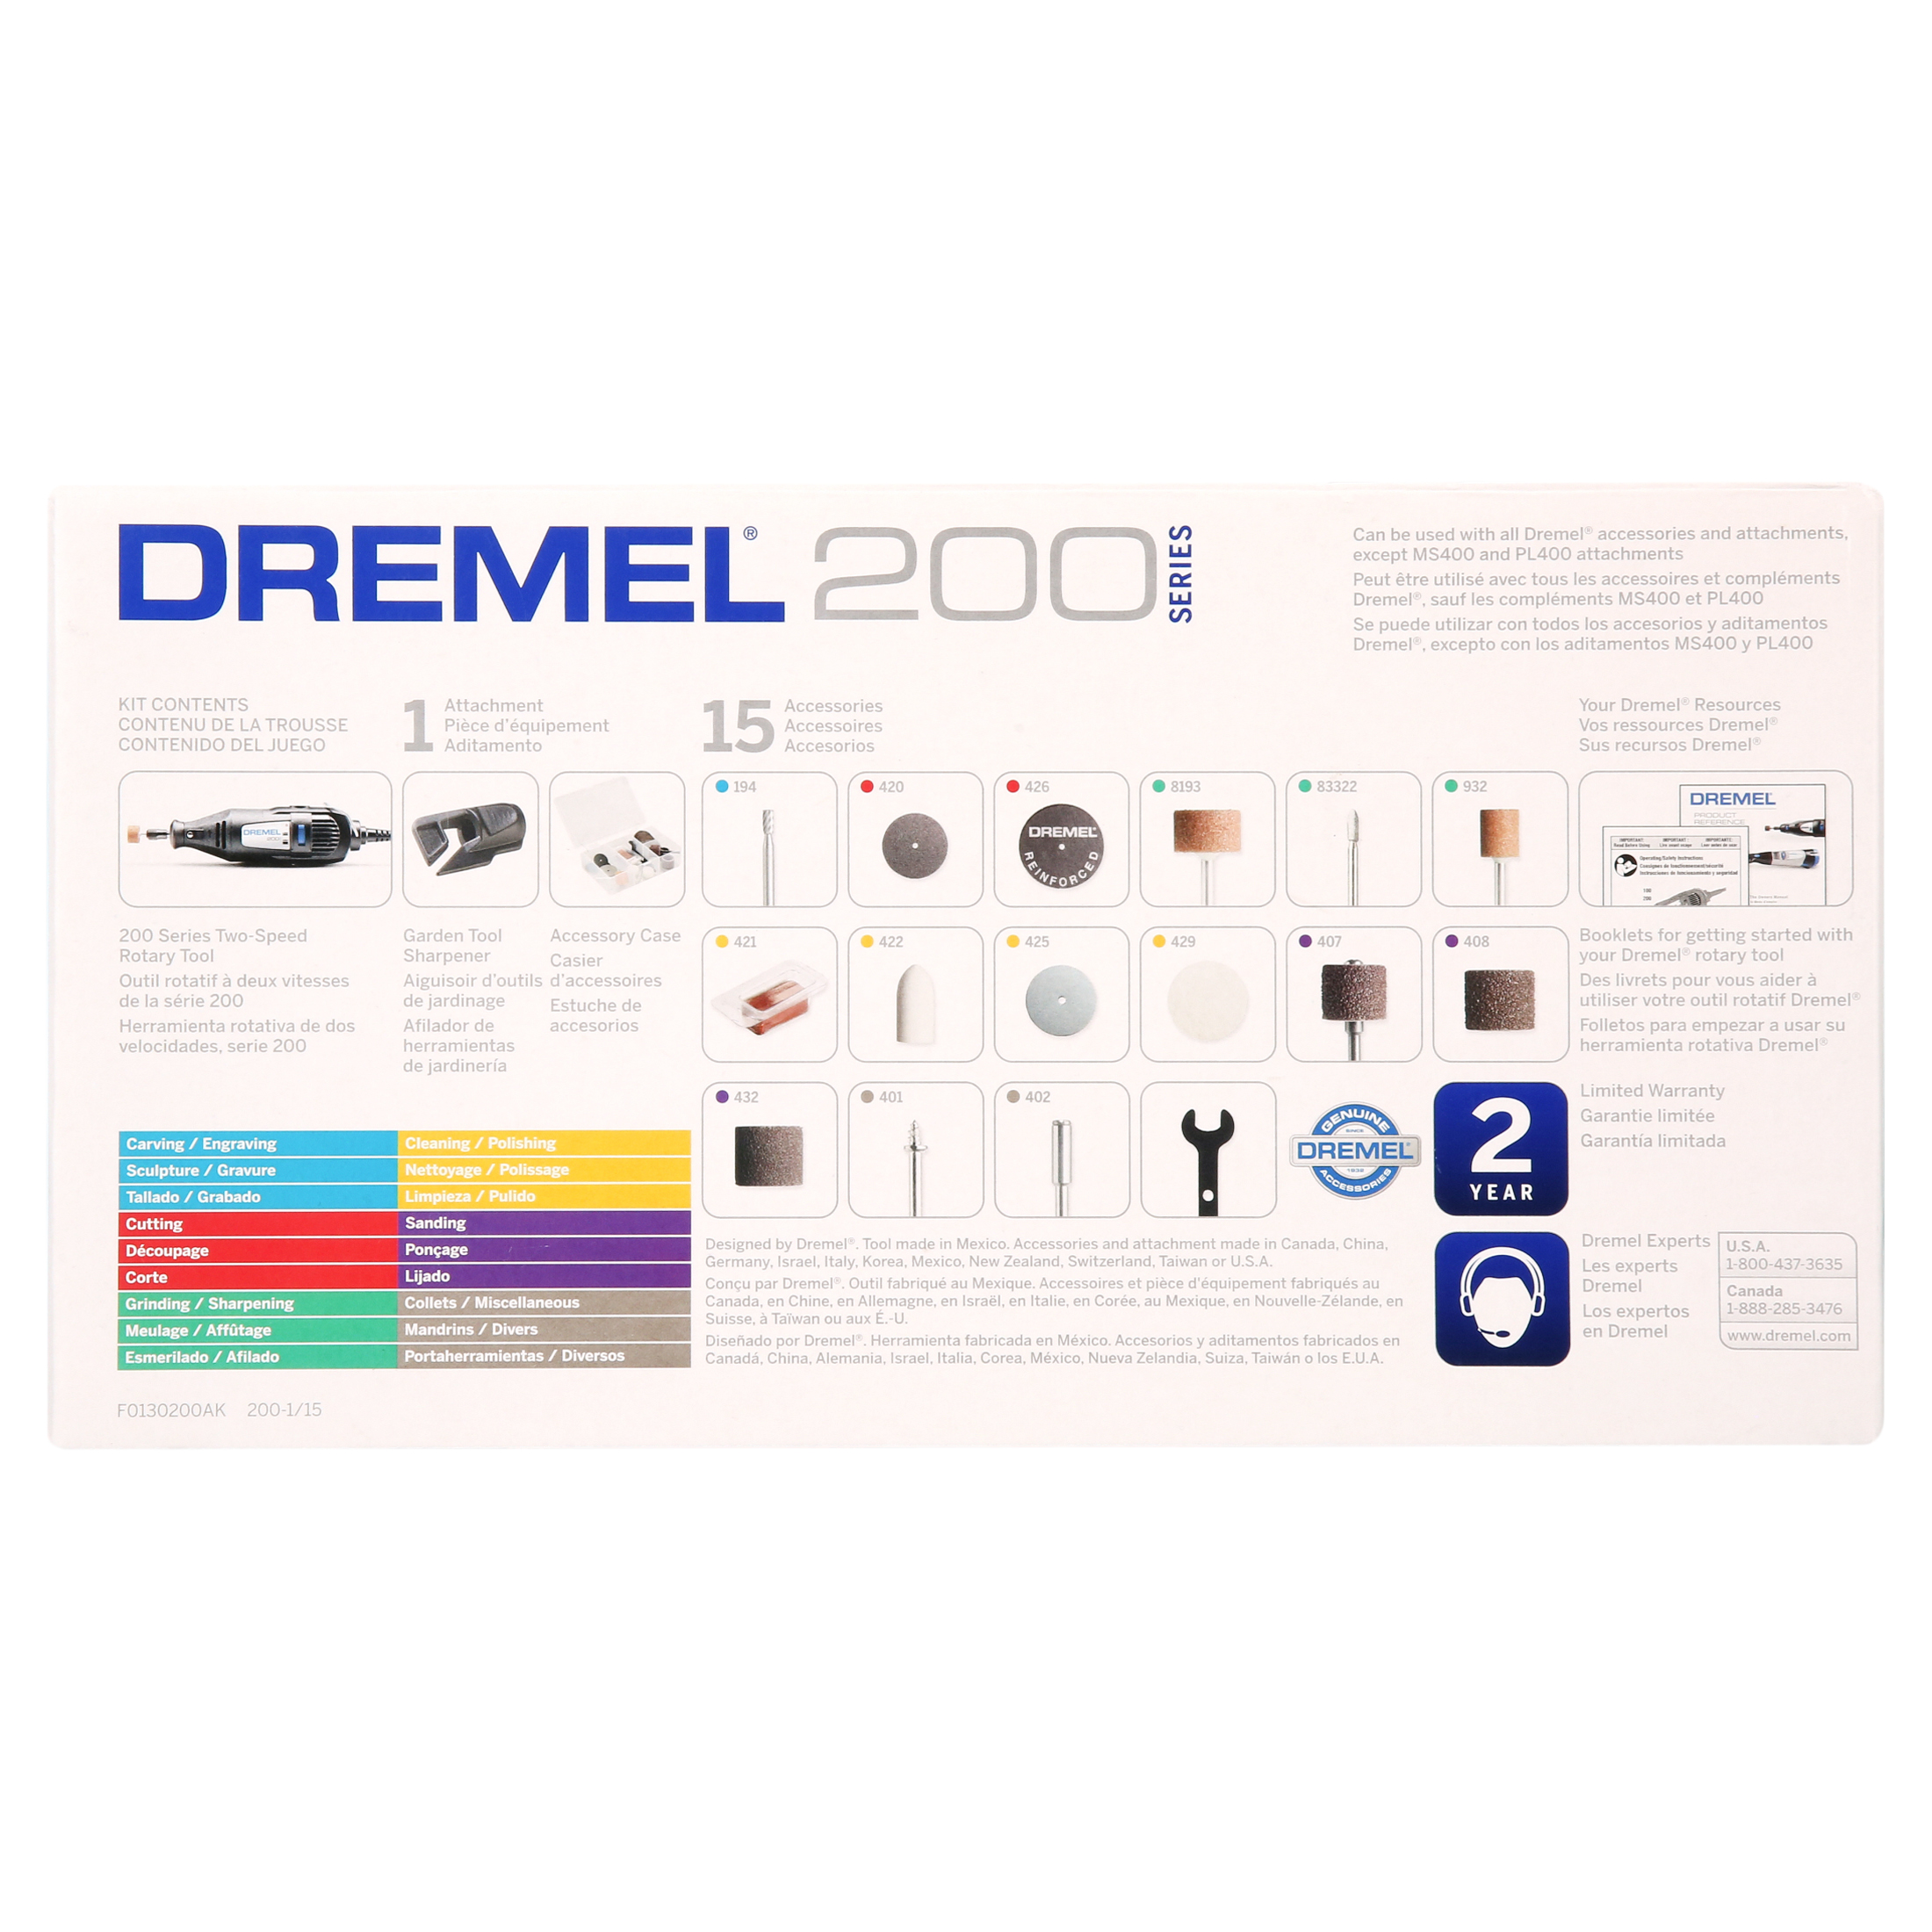 Dremel 200-1/15 Two Speed Rotary Tool Kit with Attachment 15 Accessories  Hobby Drill, Woodworking Carving Tool, Glass Etcher, Small Pen Sander,  Garden Tool Sharpener, Craft and Jewelry Drill